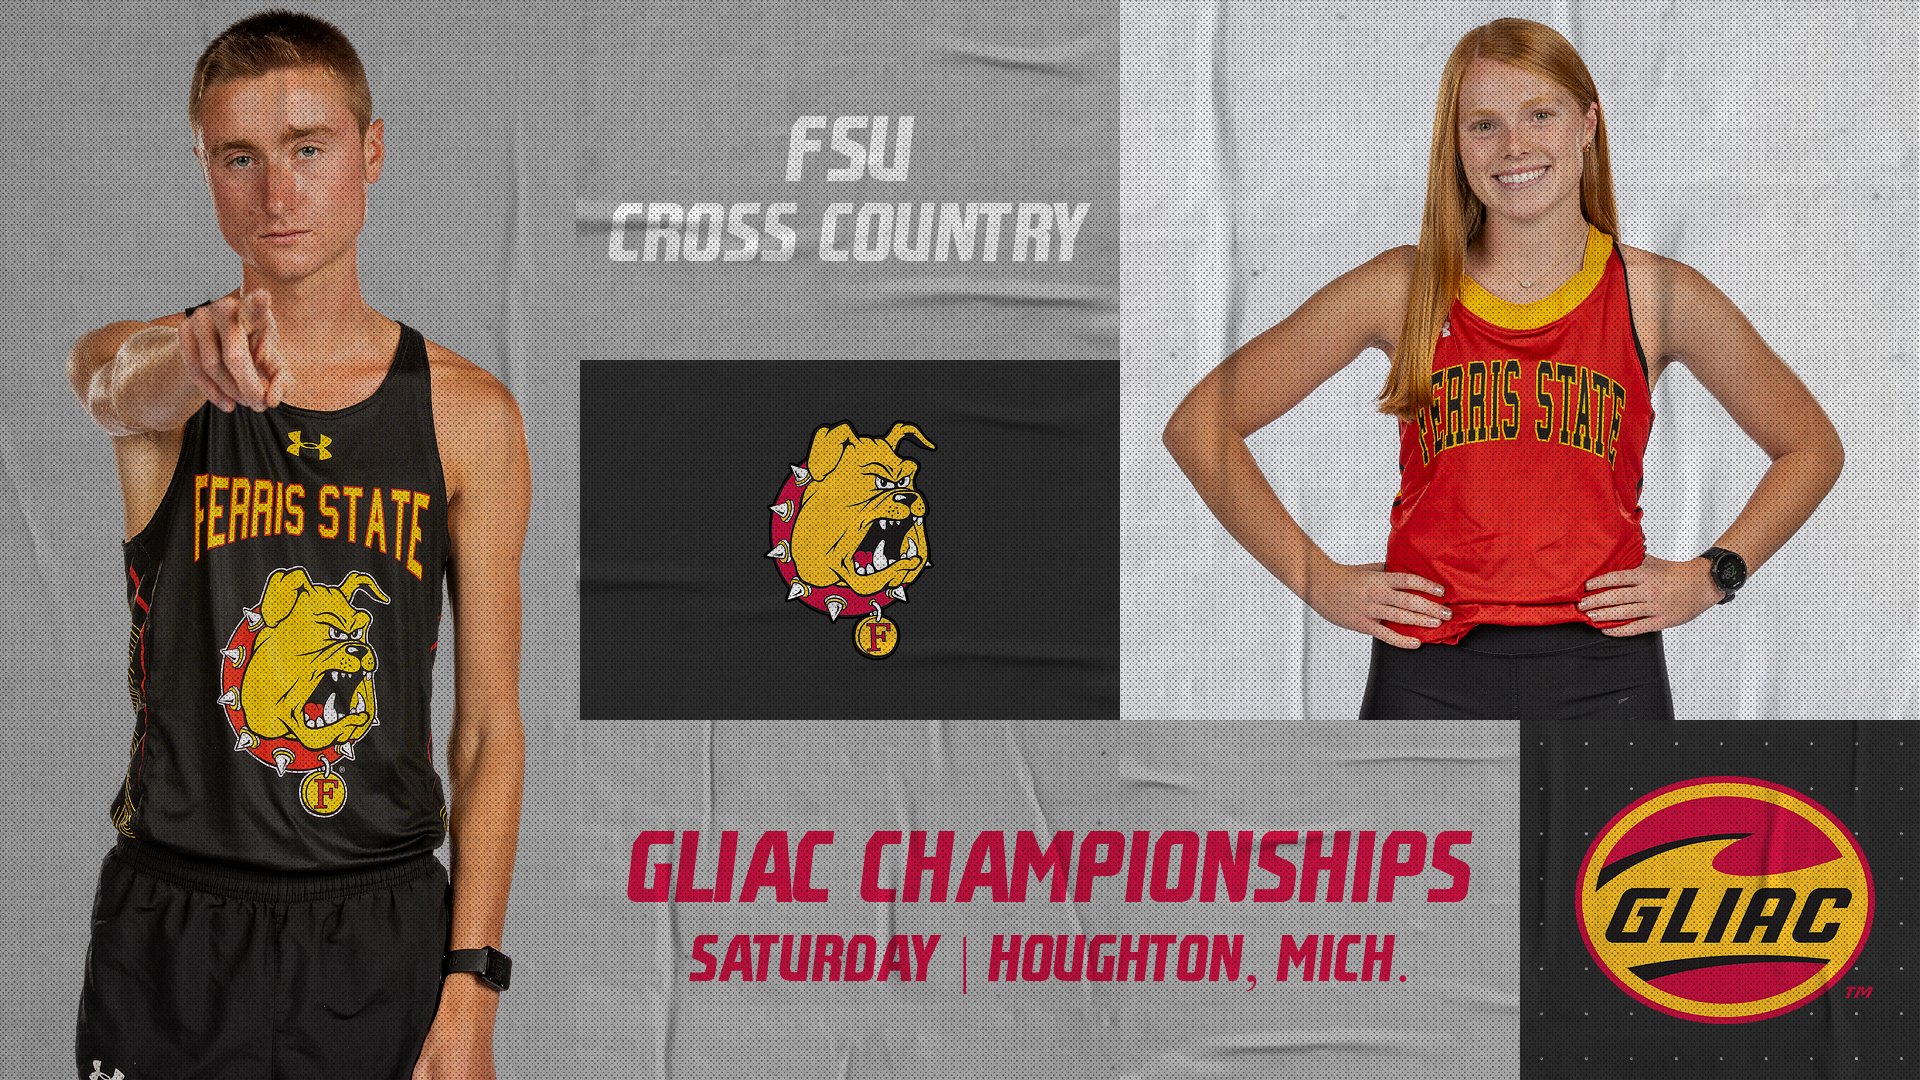 Bulldog Cross Country Squads Head To Houghton For GLIAC Championships This Saturday